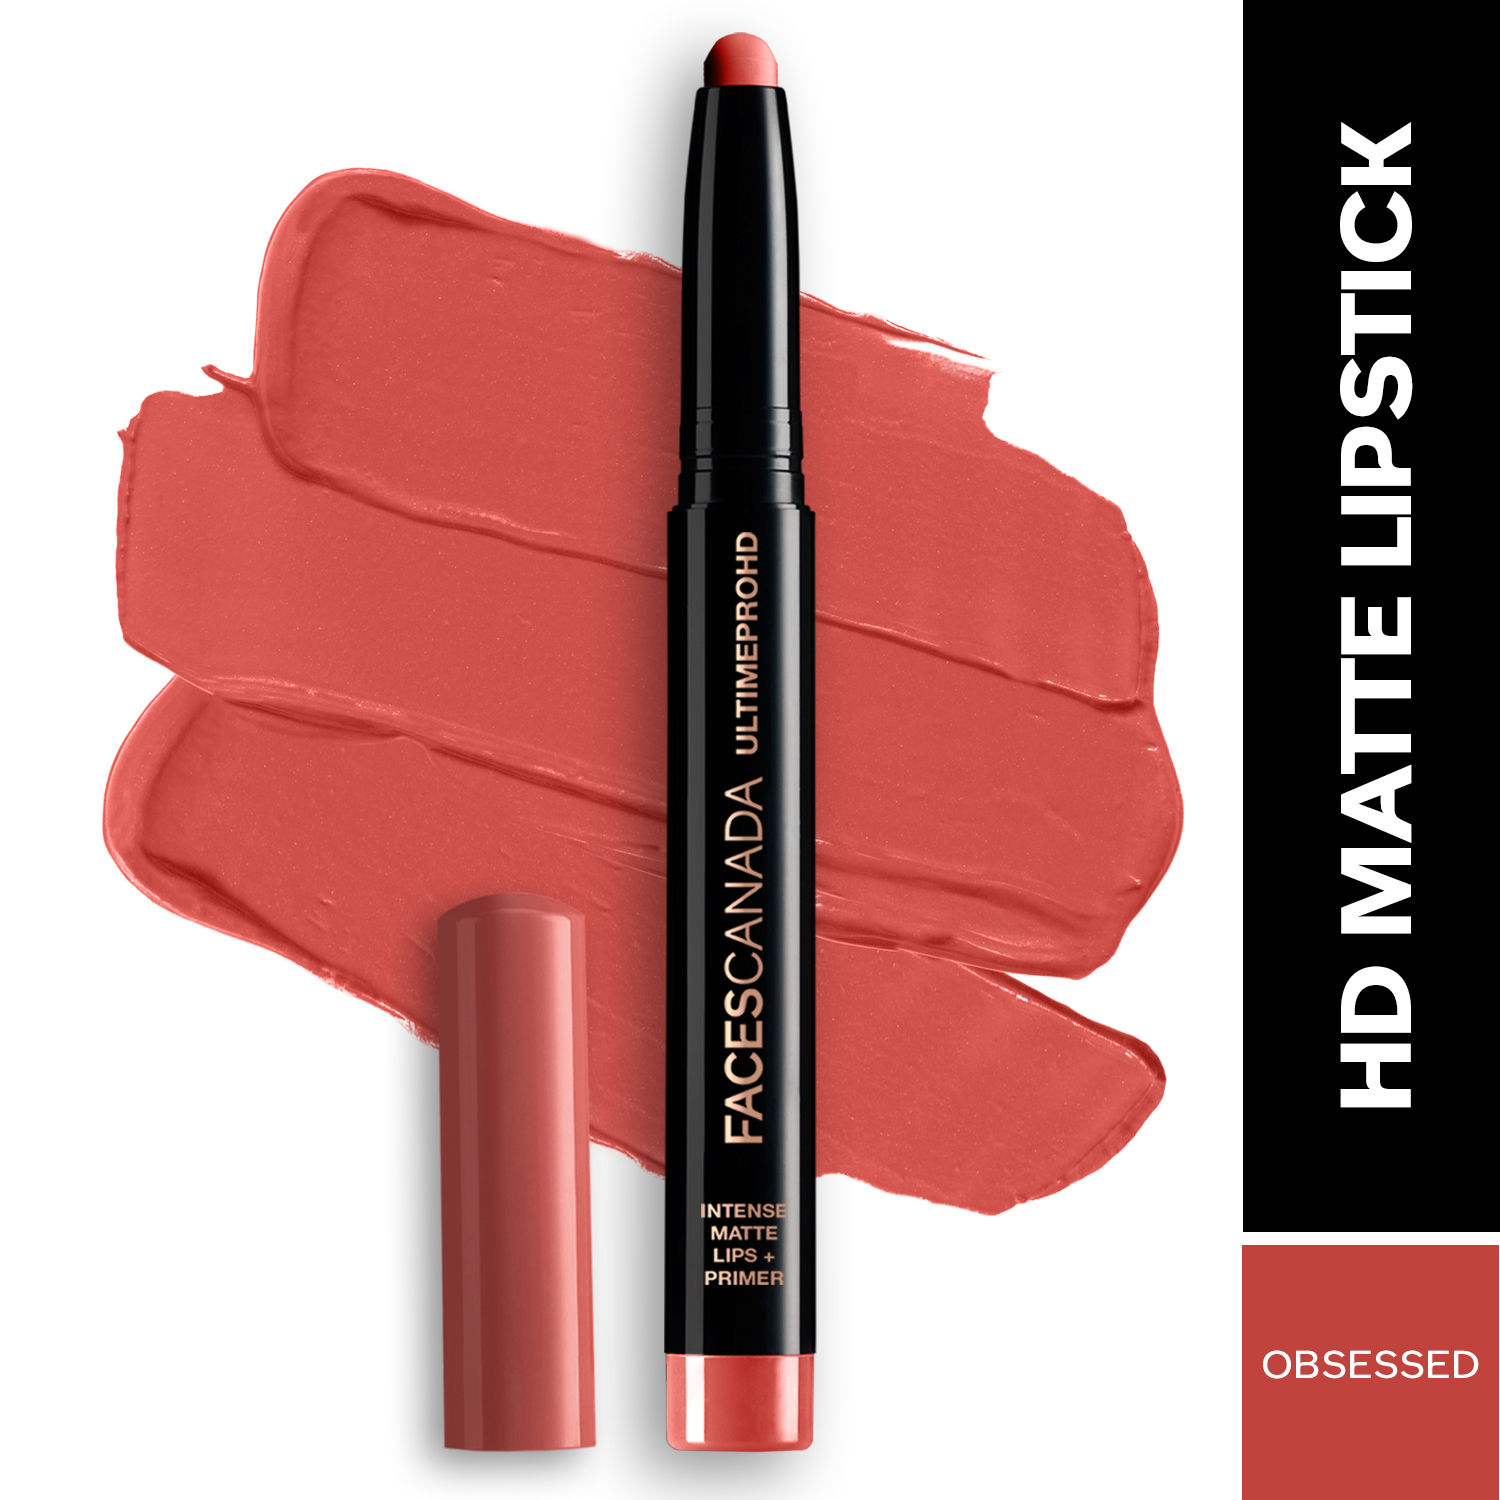 Buy FACES CANADA Ultime Pro HD Intense Matte Lipstick + Primer - Obsessed, 1.4g | 9HR Long Stay | Feather-Light Comfort | Intense Color | Smooth Glide - Purplle